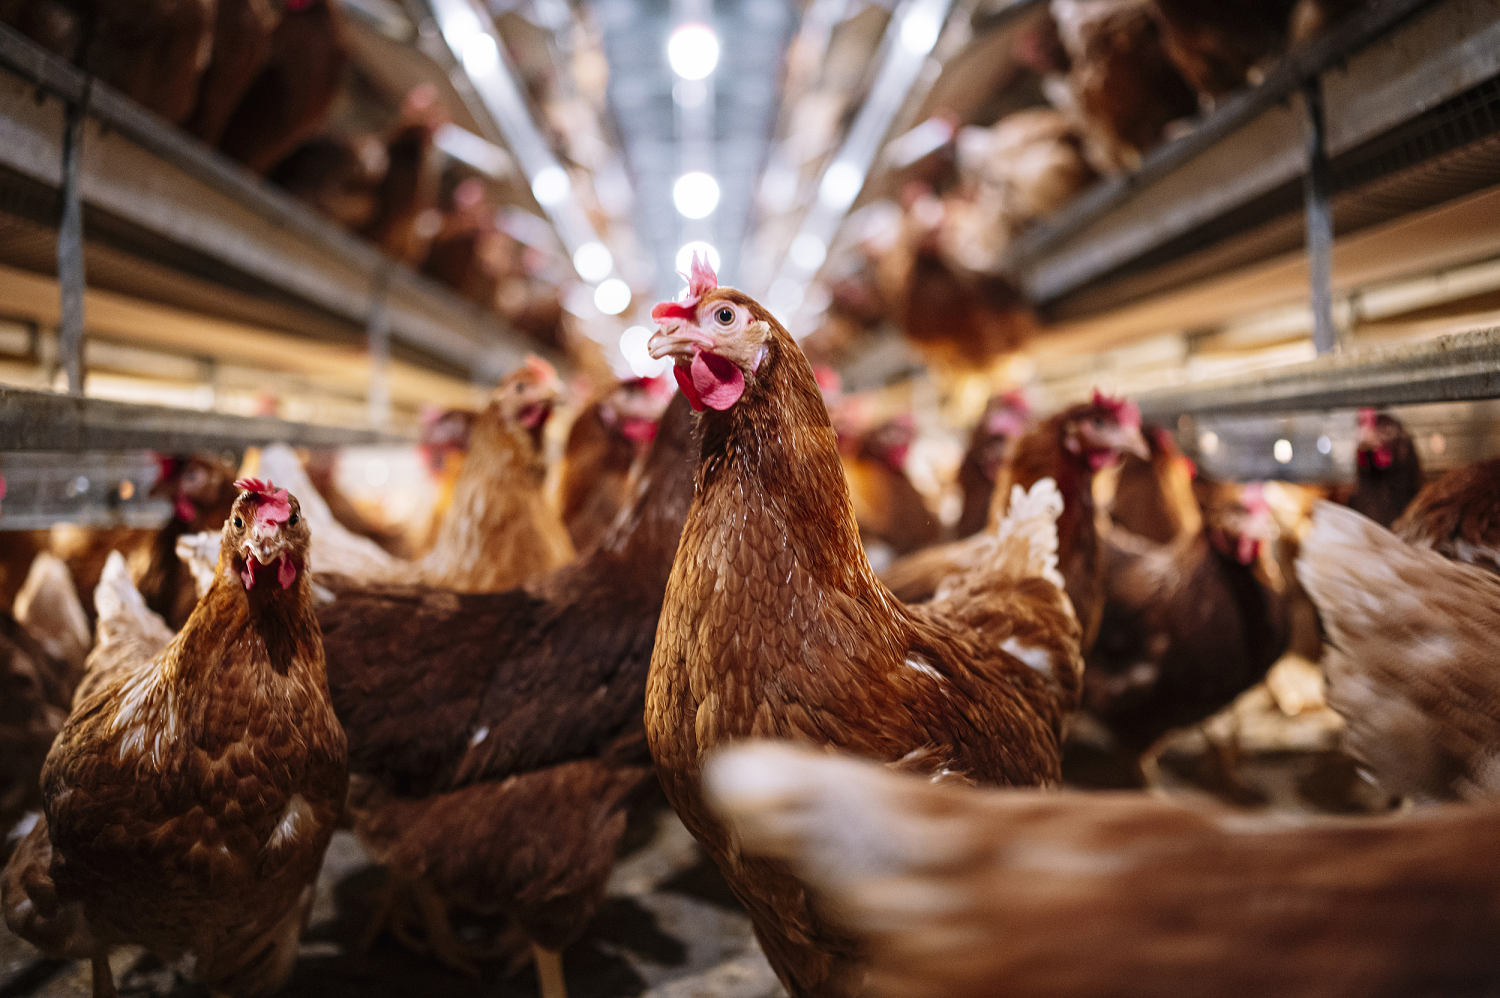 U.S. health officials confirm four new bird flu cases in Colorado poultry workers   